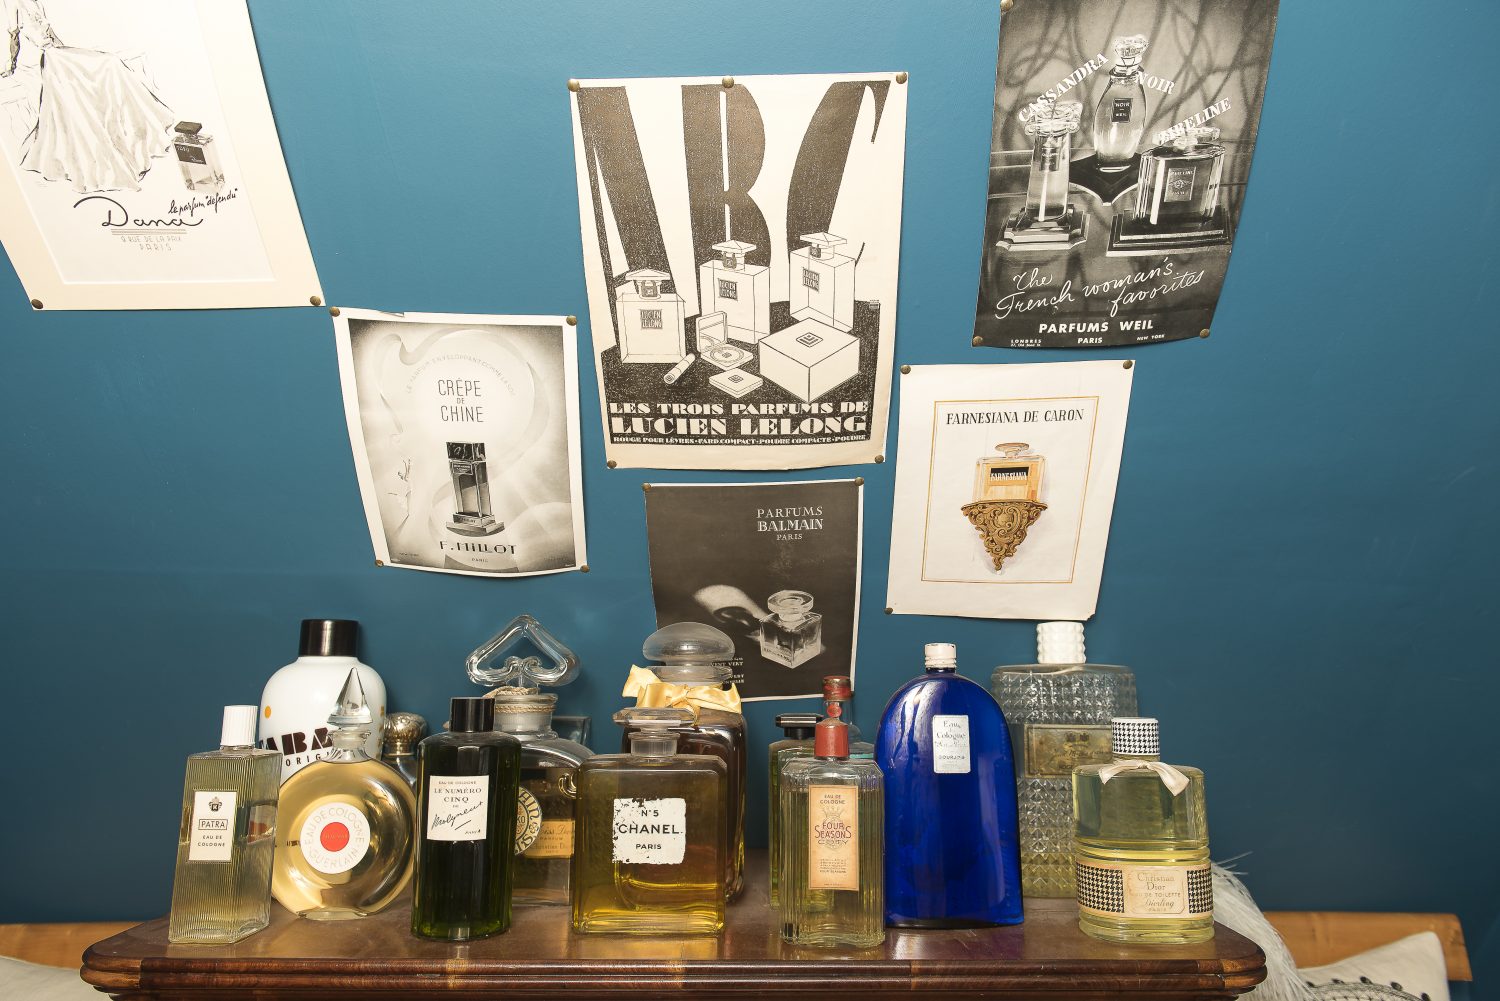 More of Will’s vintage perfume bottle collection, displayed in the dressing room and the master bedroom